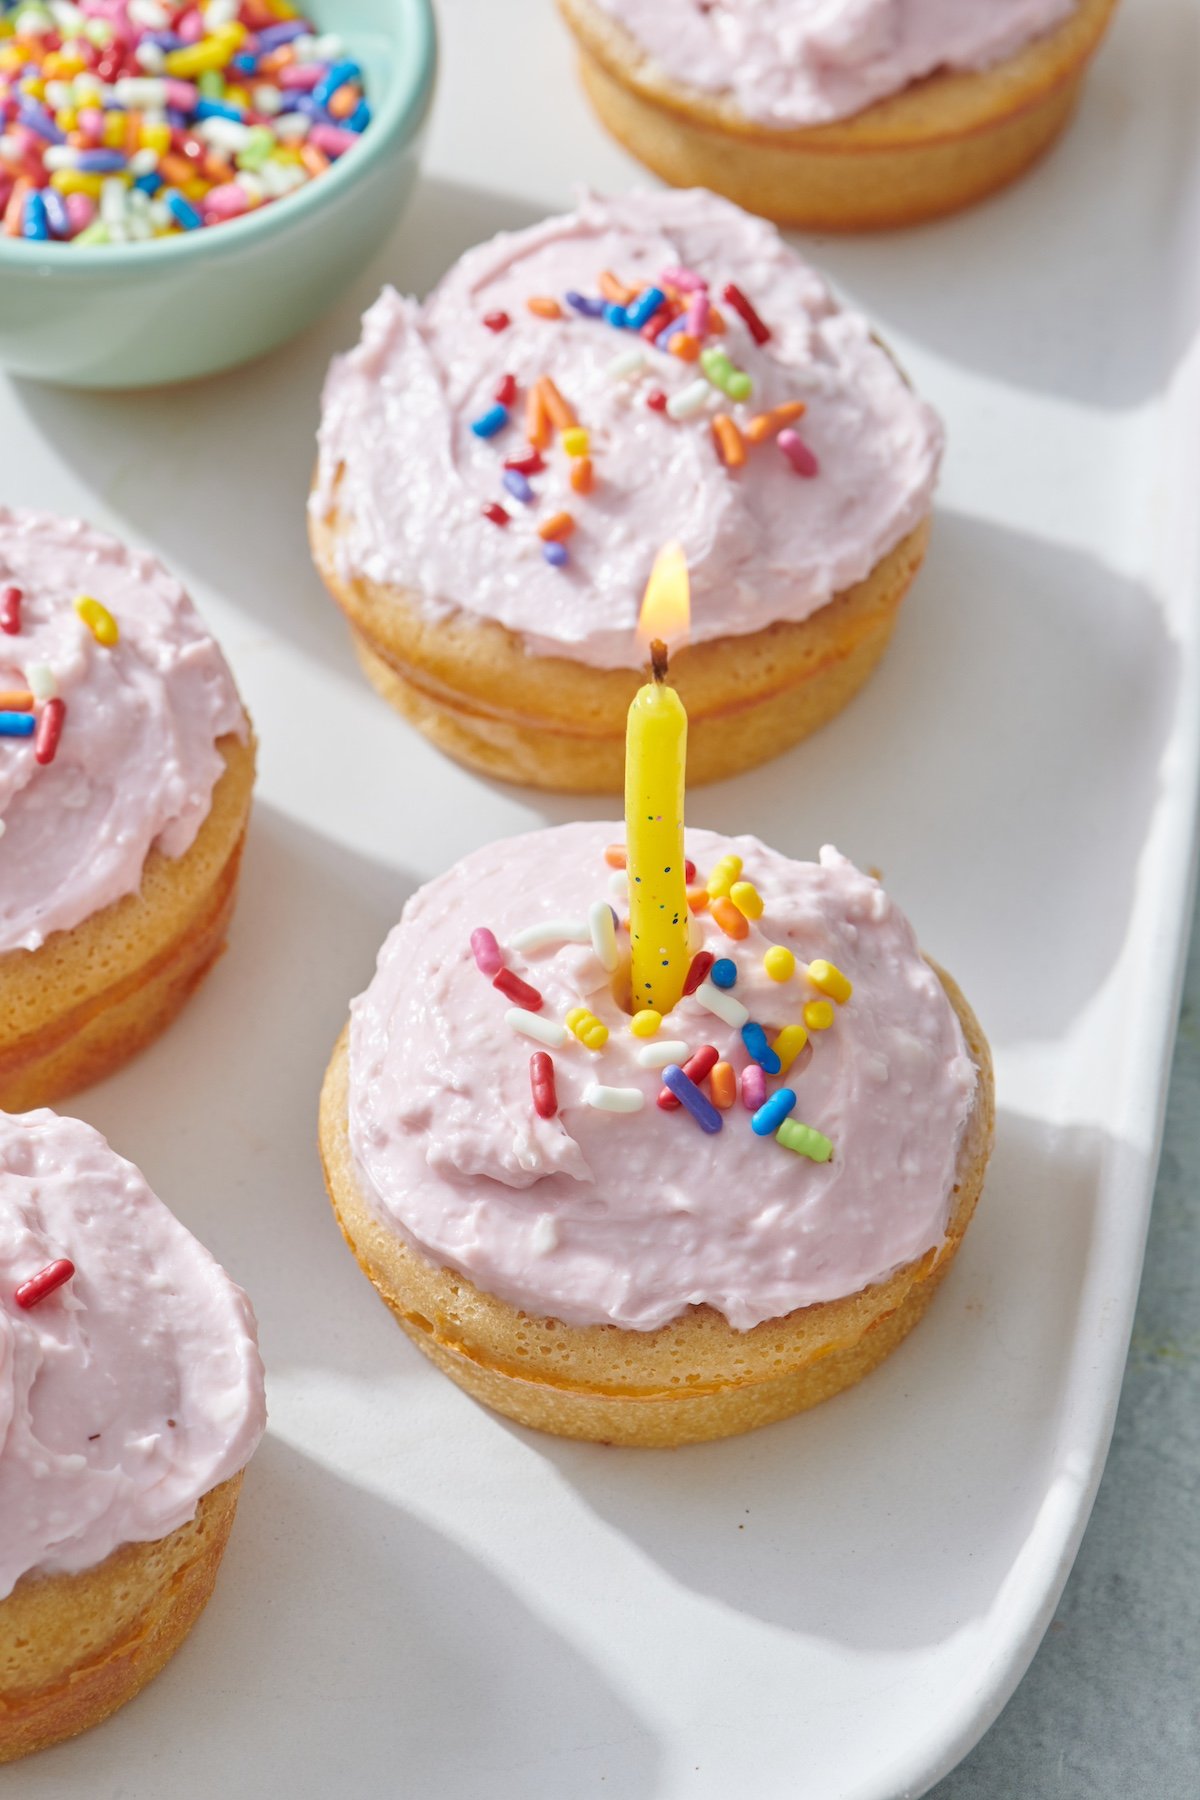 Breakfast Cupcake wit pink frosting, rainbow color sprinkles and birthday candle in the center.